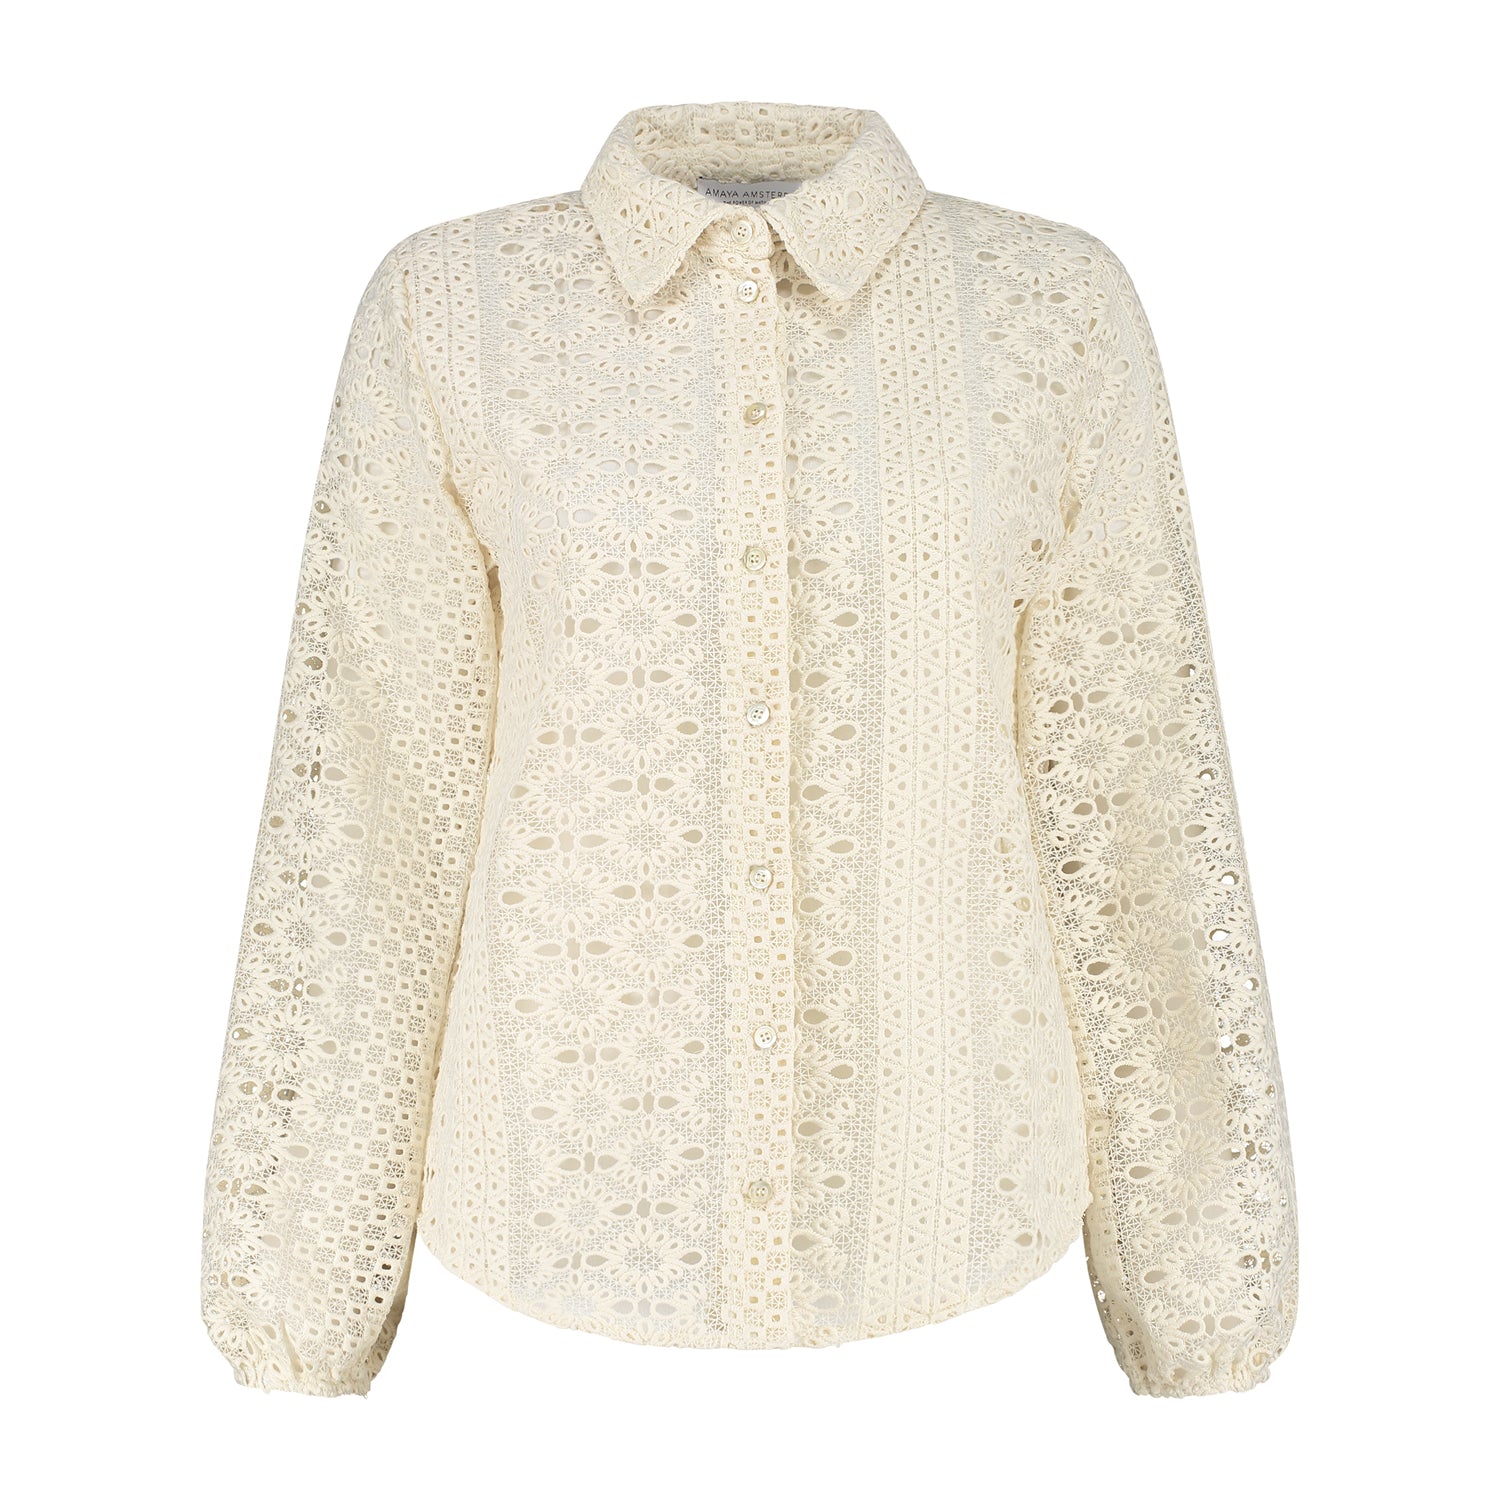 Bailey blouse - off white